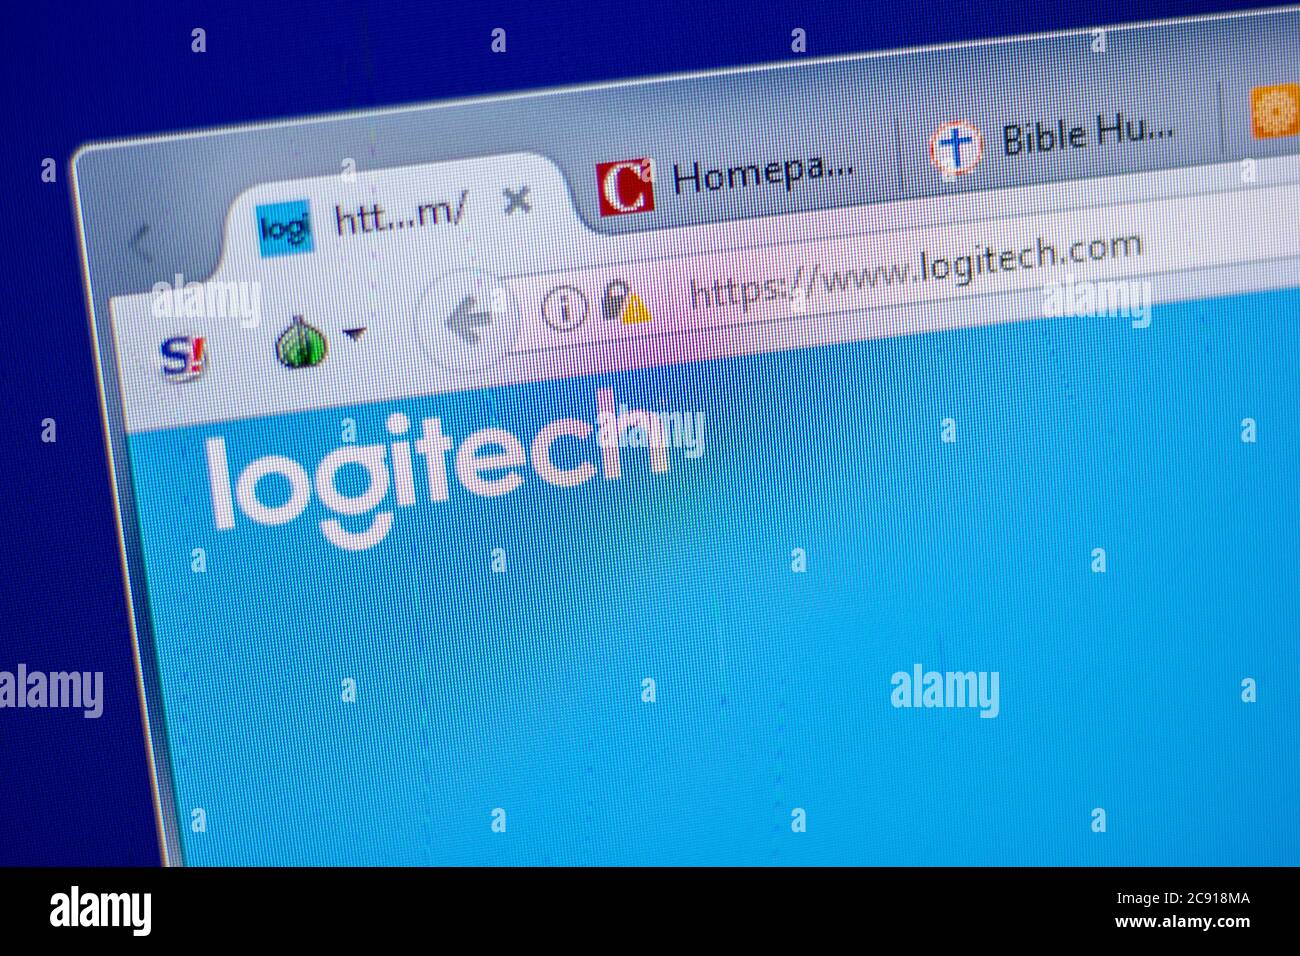 Logitech Sign High Resolution Stock Photography and Images - Alamy